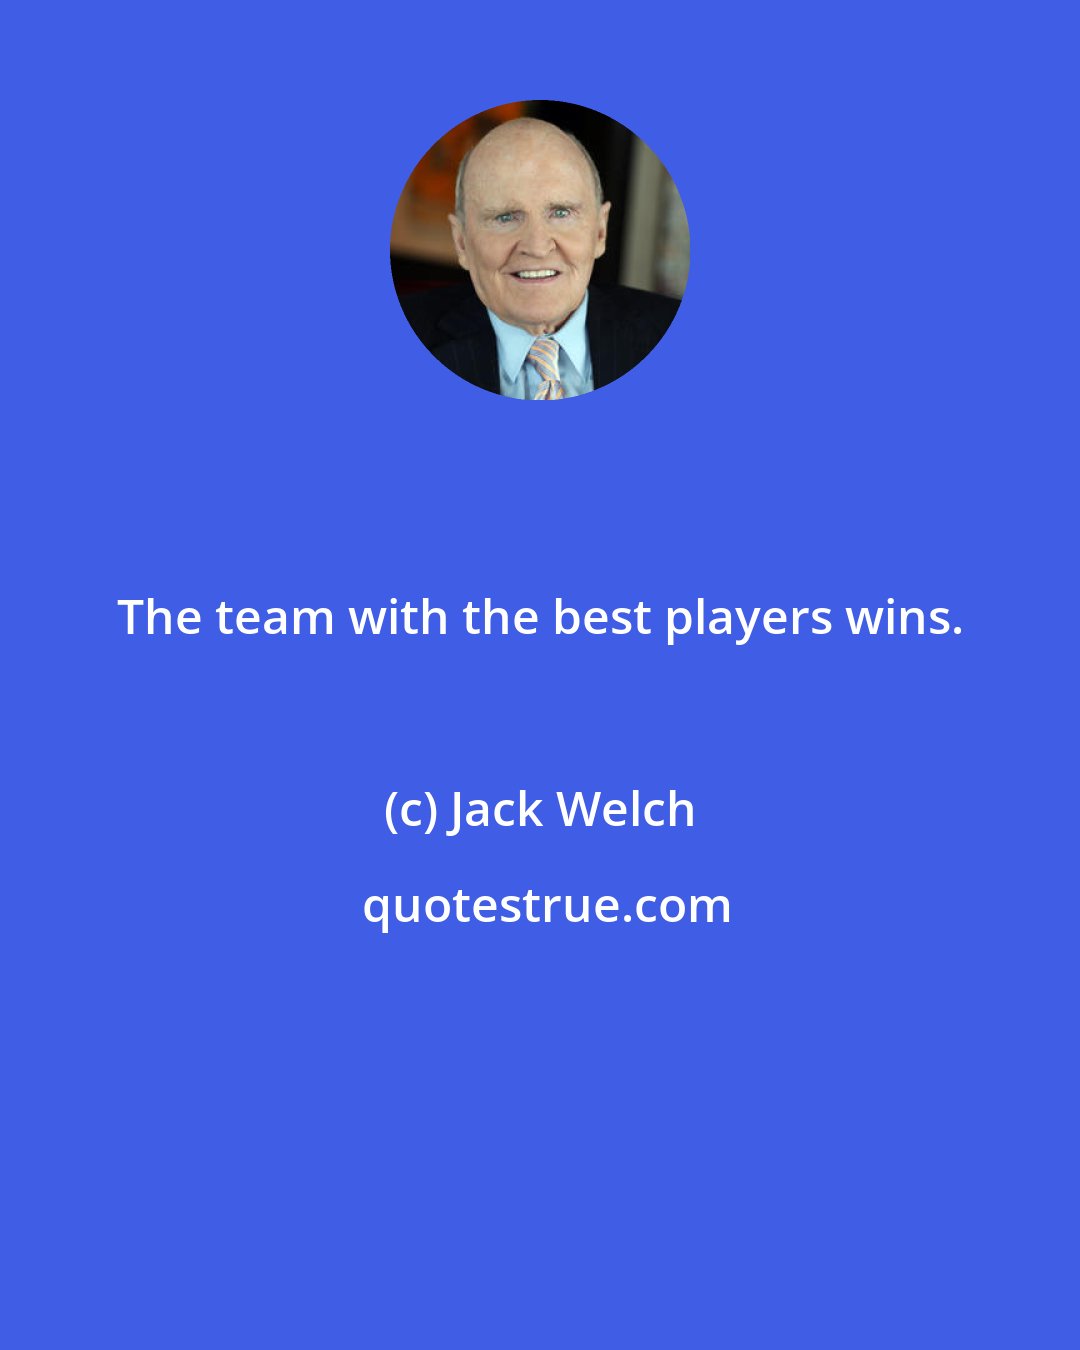 Jack Welch: The team with the best players wins.